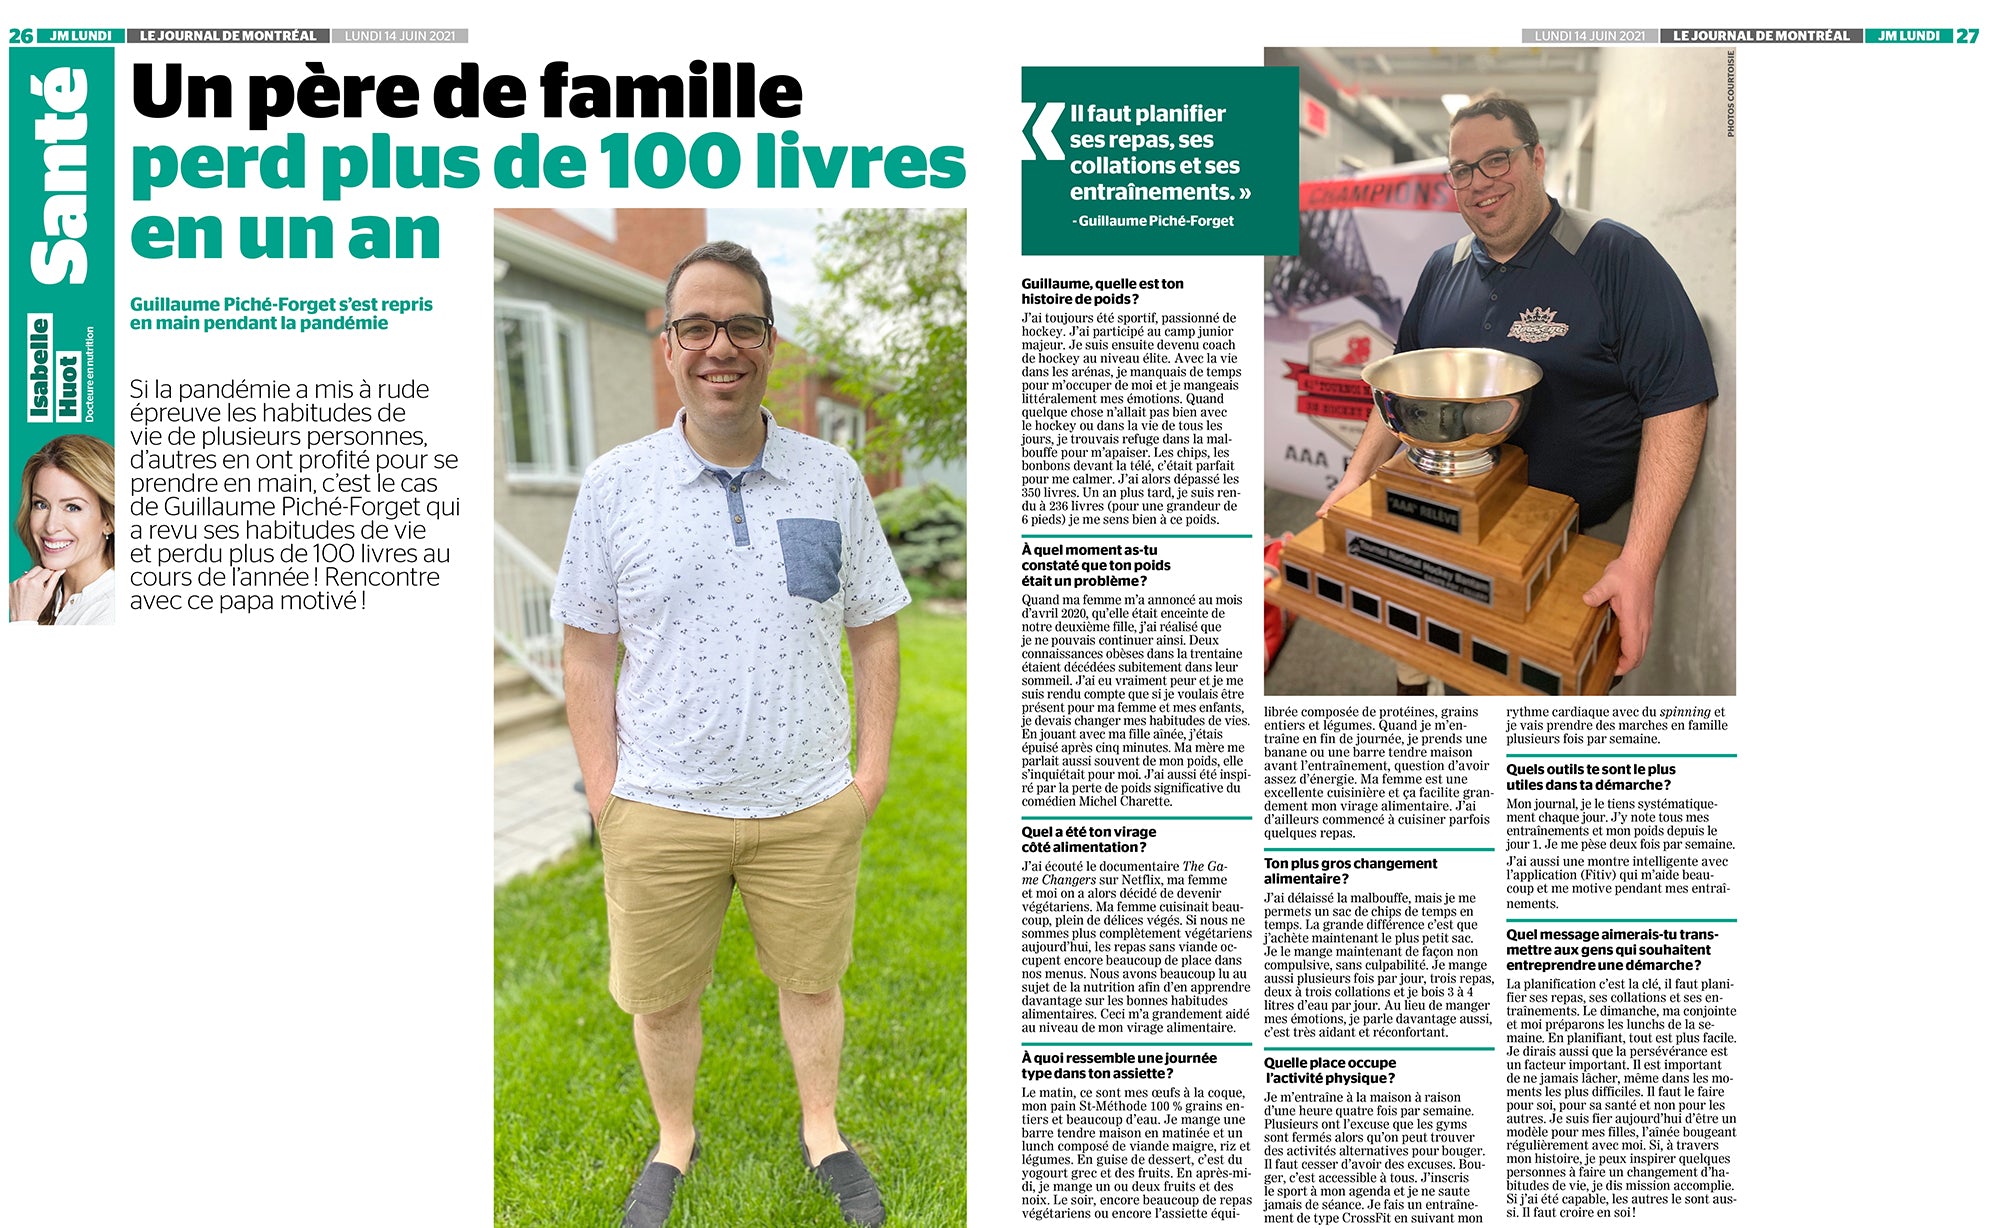 A motivated family man changed his lifestyle during the pandemic and lost more than 100 pounds in one year. Come read the inspiring testimony, an article by Isabelle Huot, Doctor of Nutrition in the Journal de Montréal